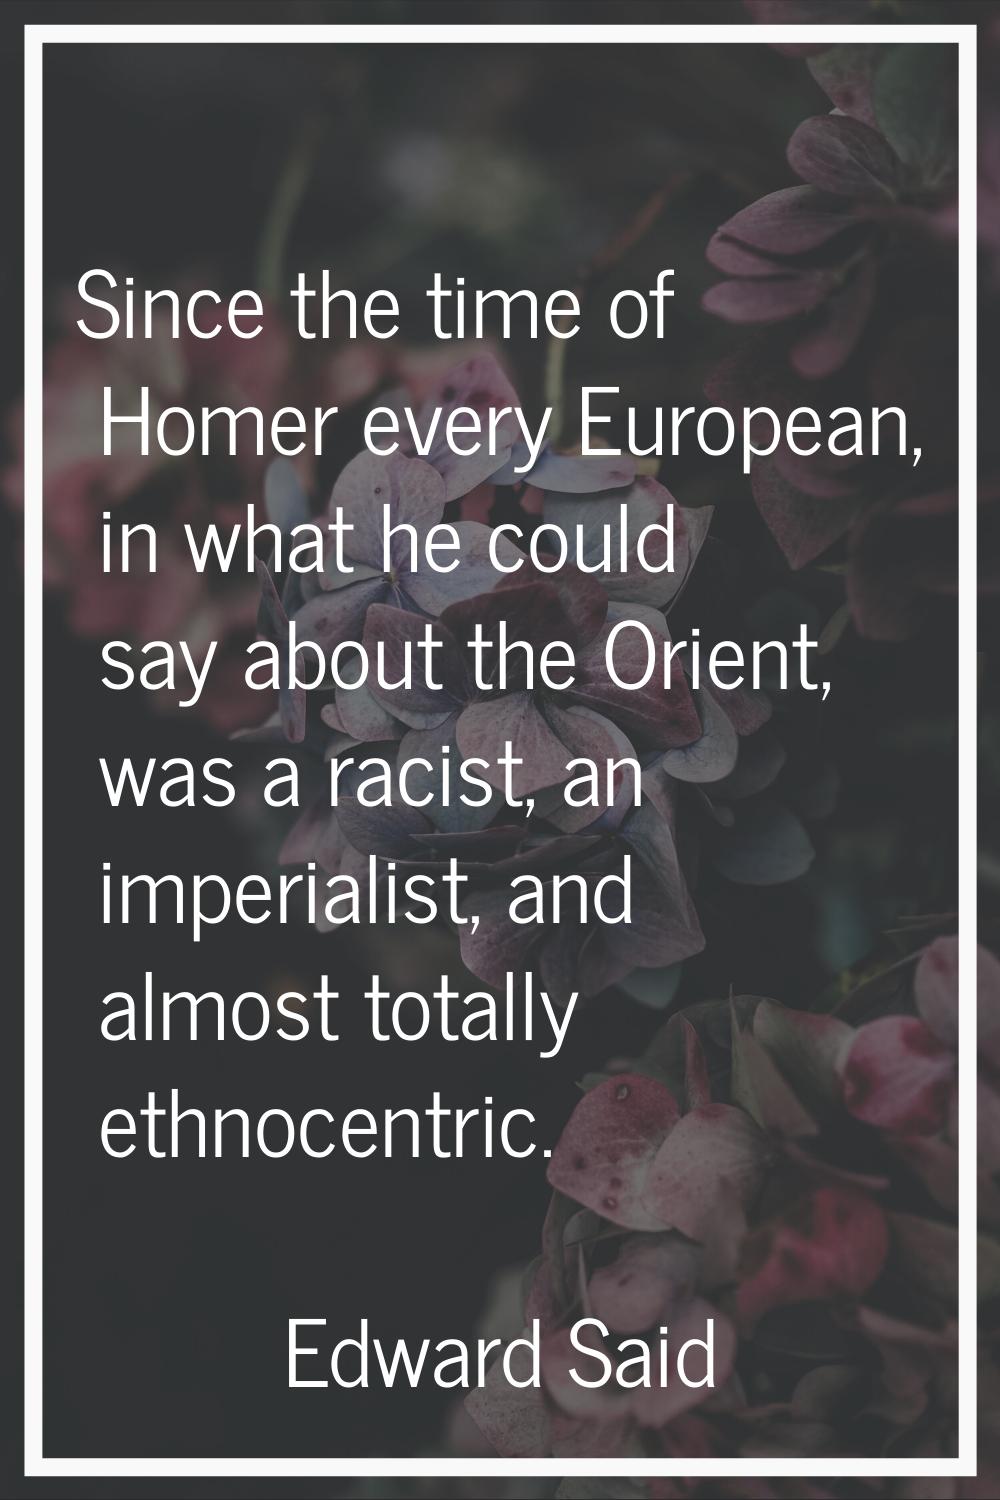 Since the time of Homer every European, in what he could say about the Orient, was a racist, an imp